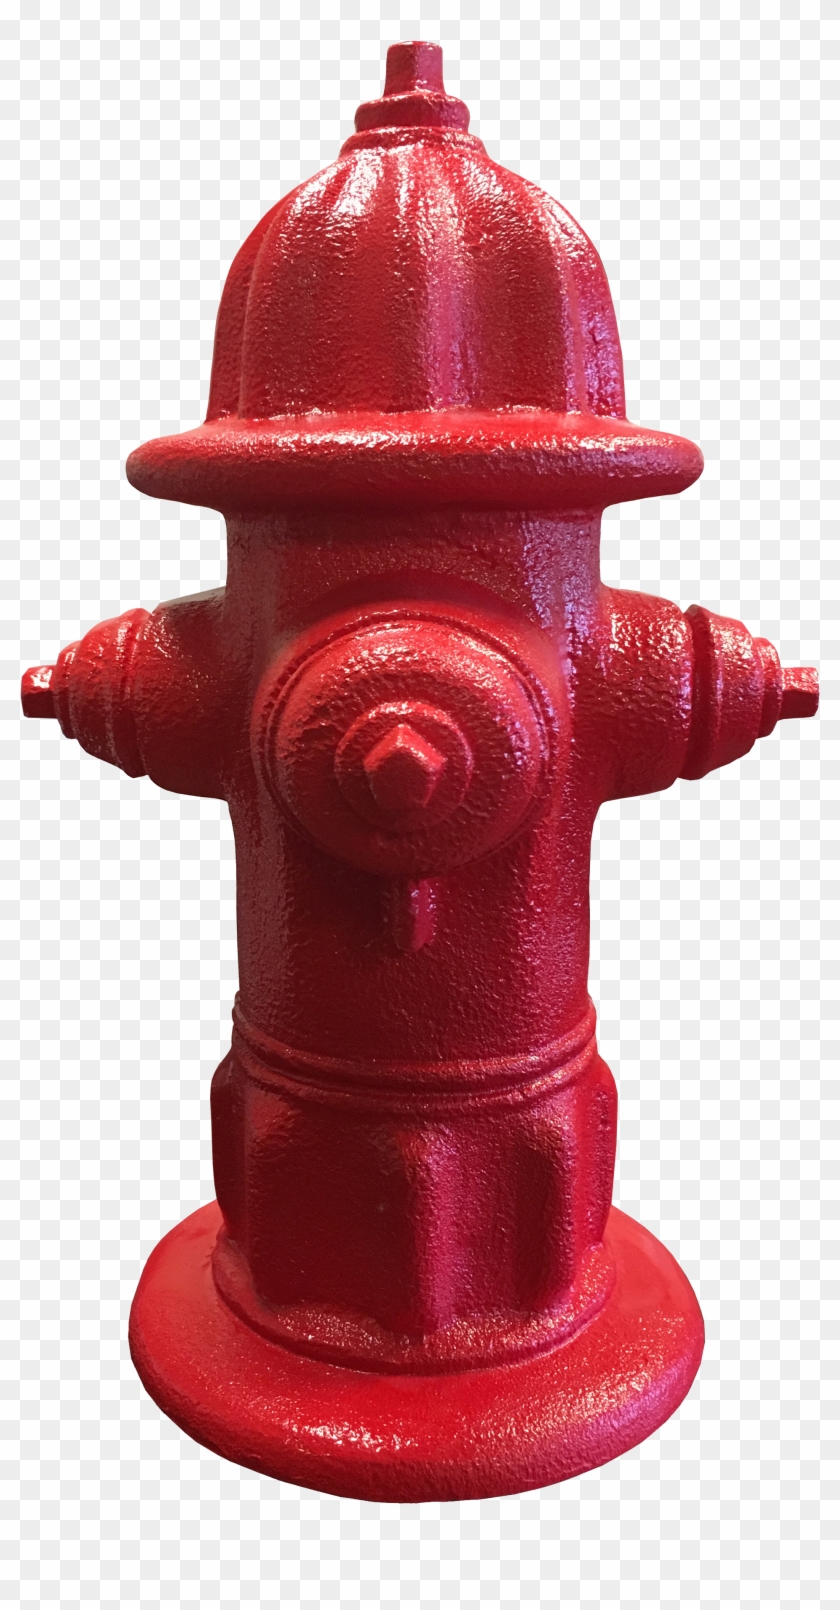 Portable Fire Hydrant - Fire Hydrant #593377